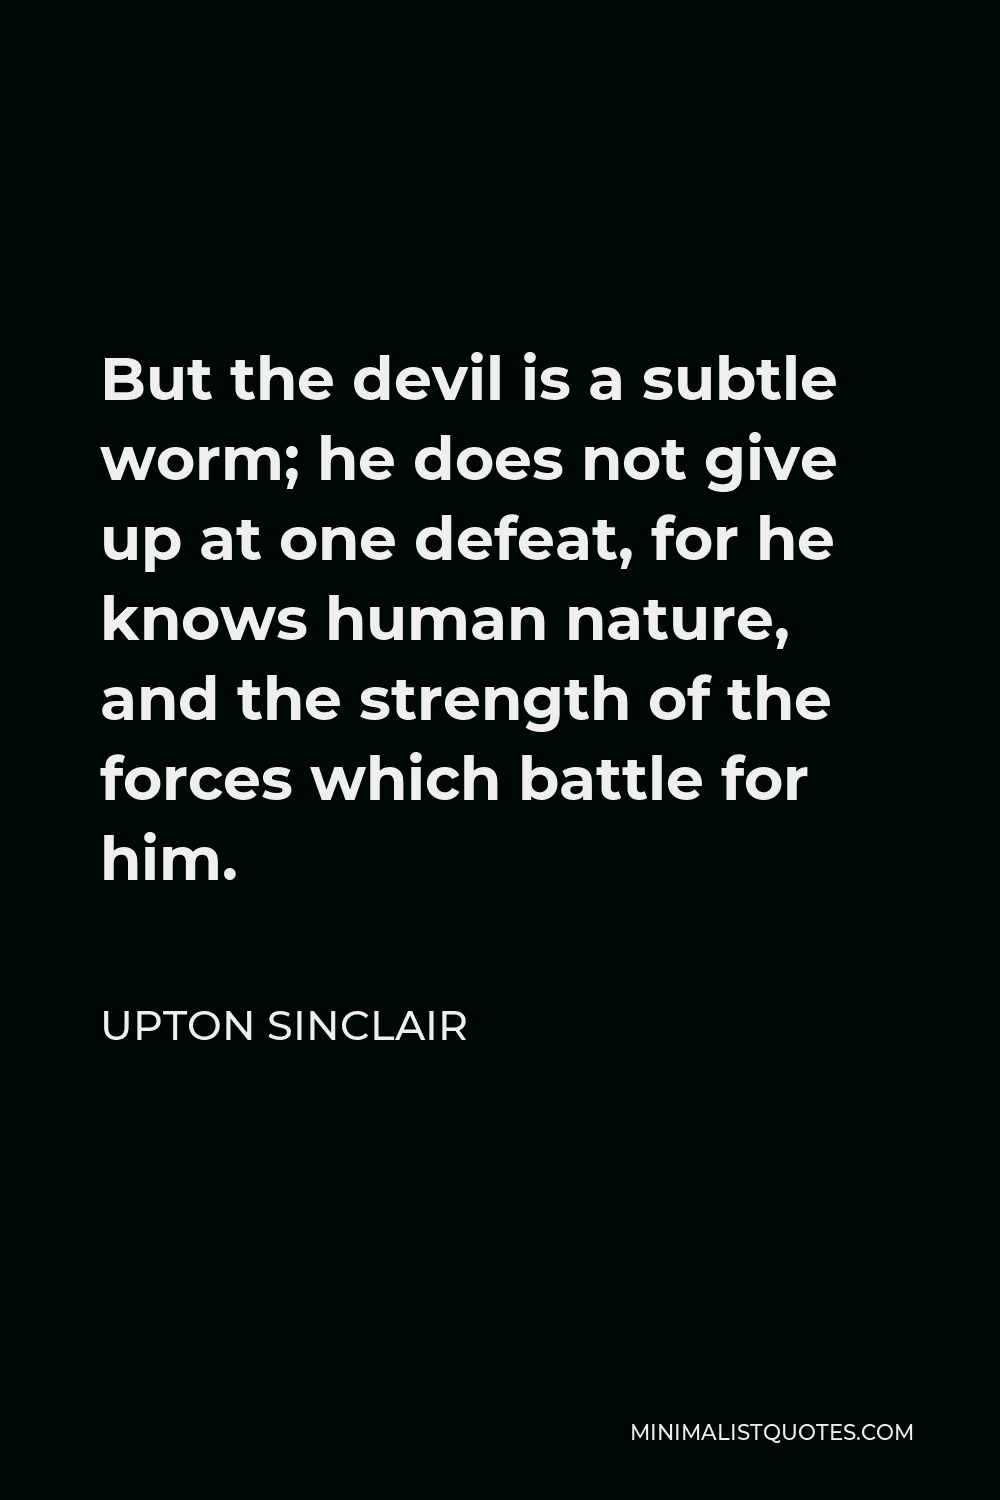 Upton Sinclair Quote - But the devil is a subtle worm; he does not give up at one defeat, for he knows human nature, and the strength of the forces which battle for him.